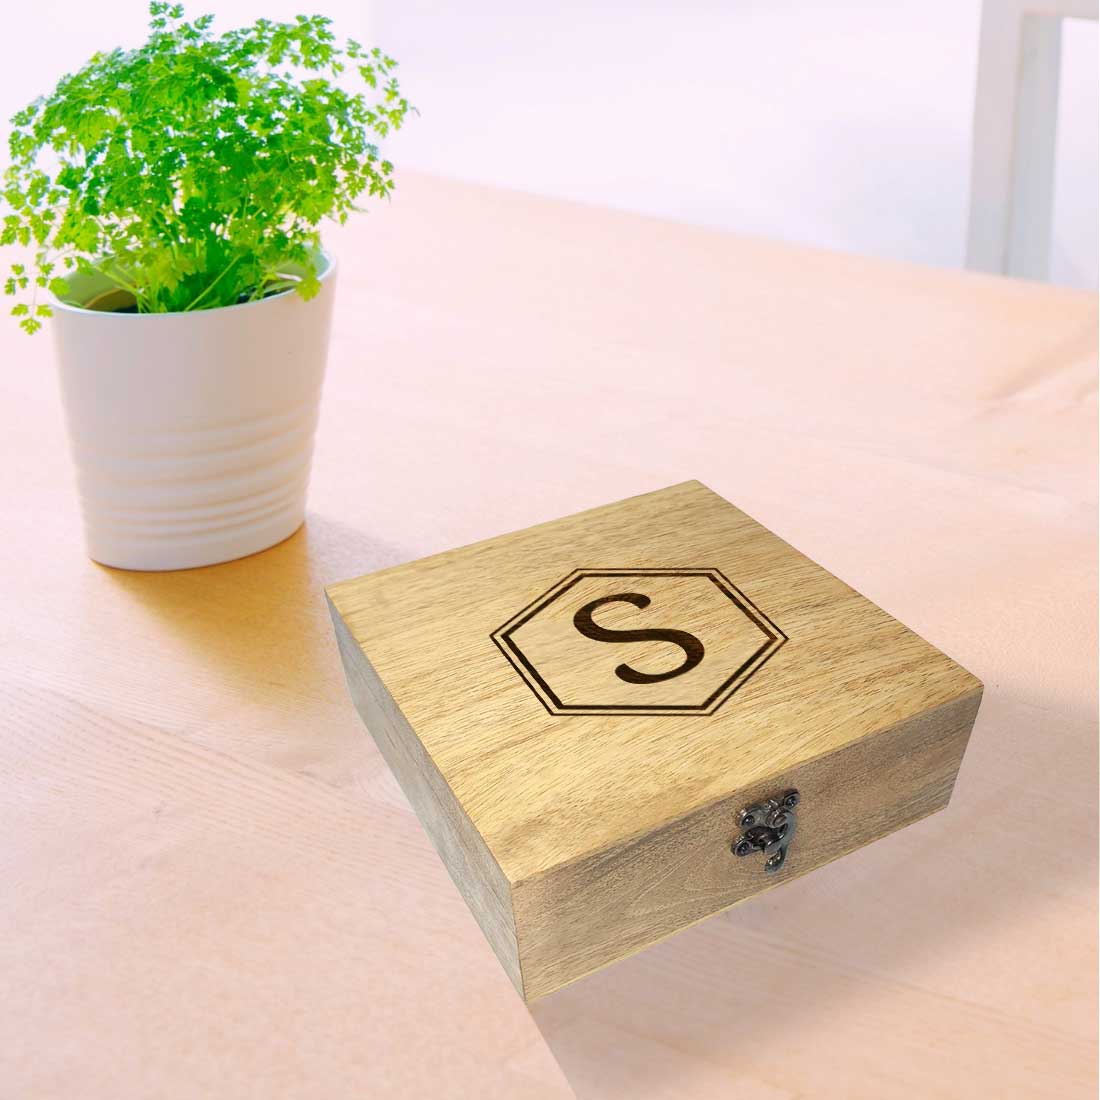 Customised Wooden Jewelry Box with Engraved Name Gift Box- Monogram